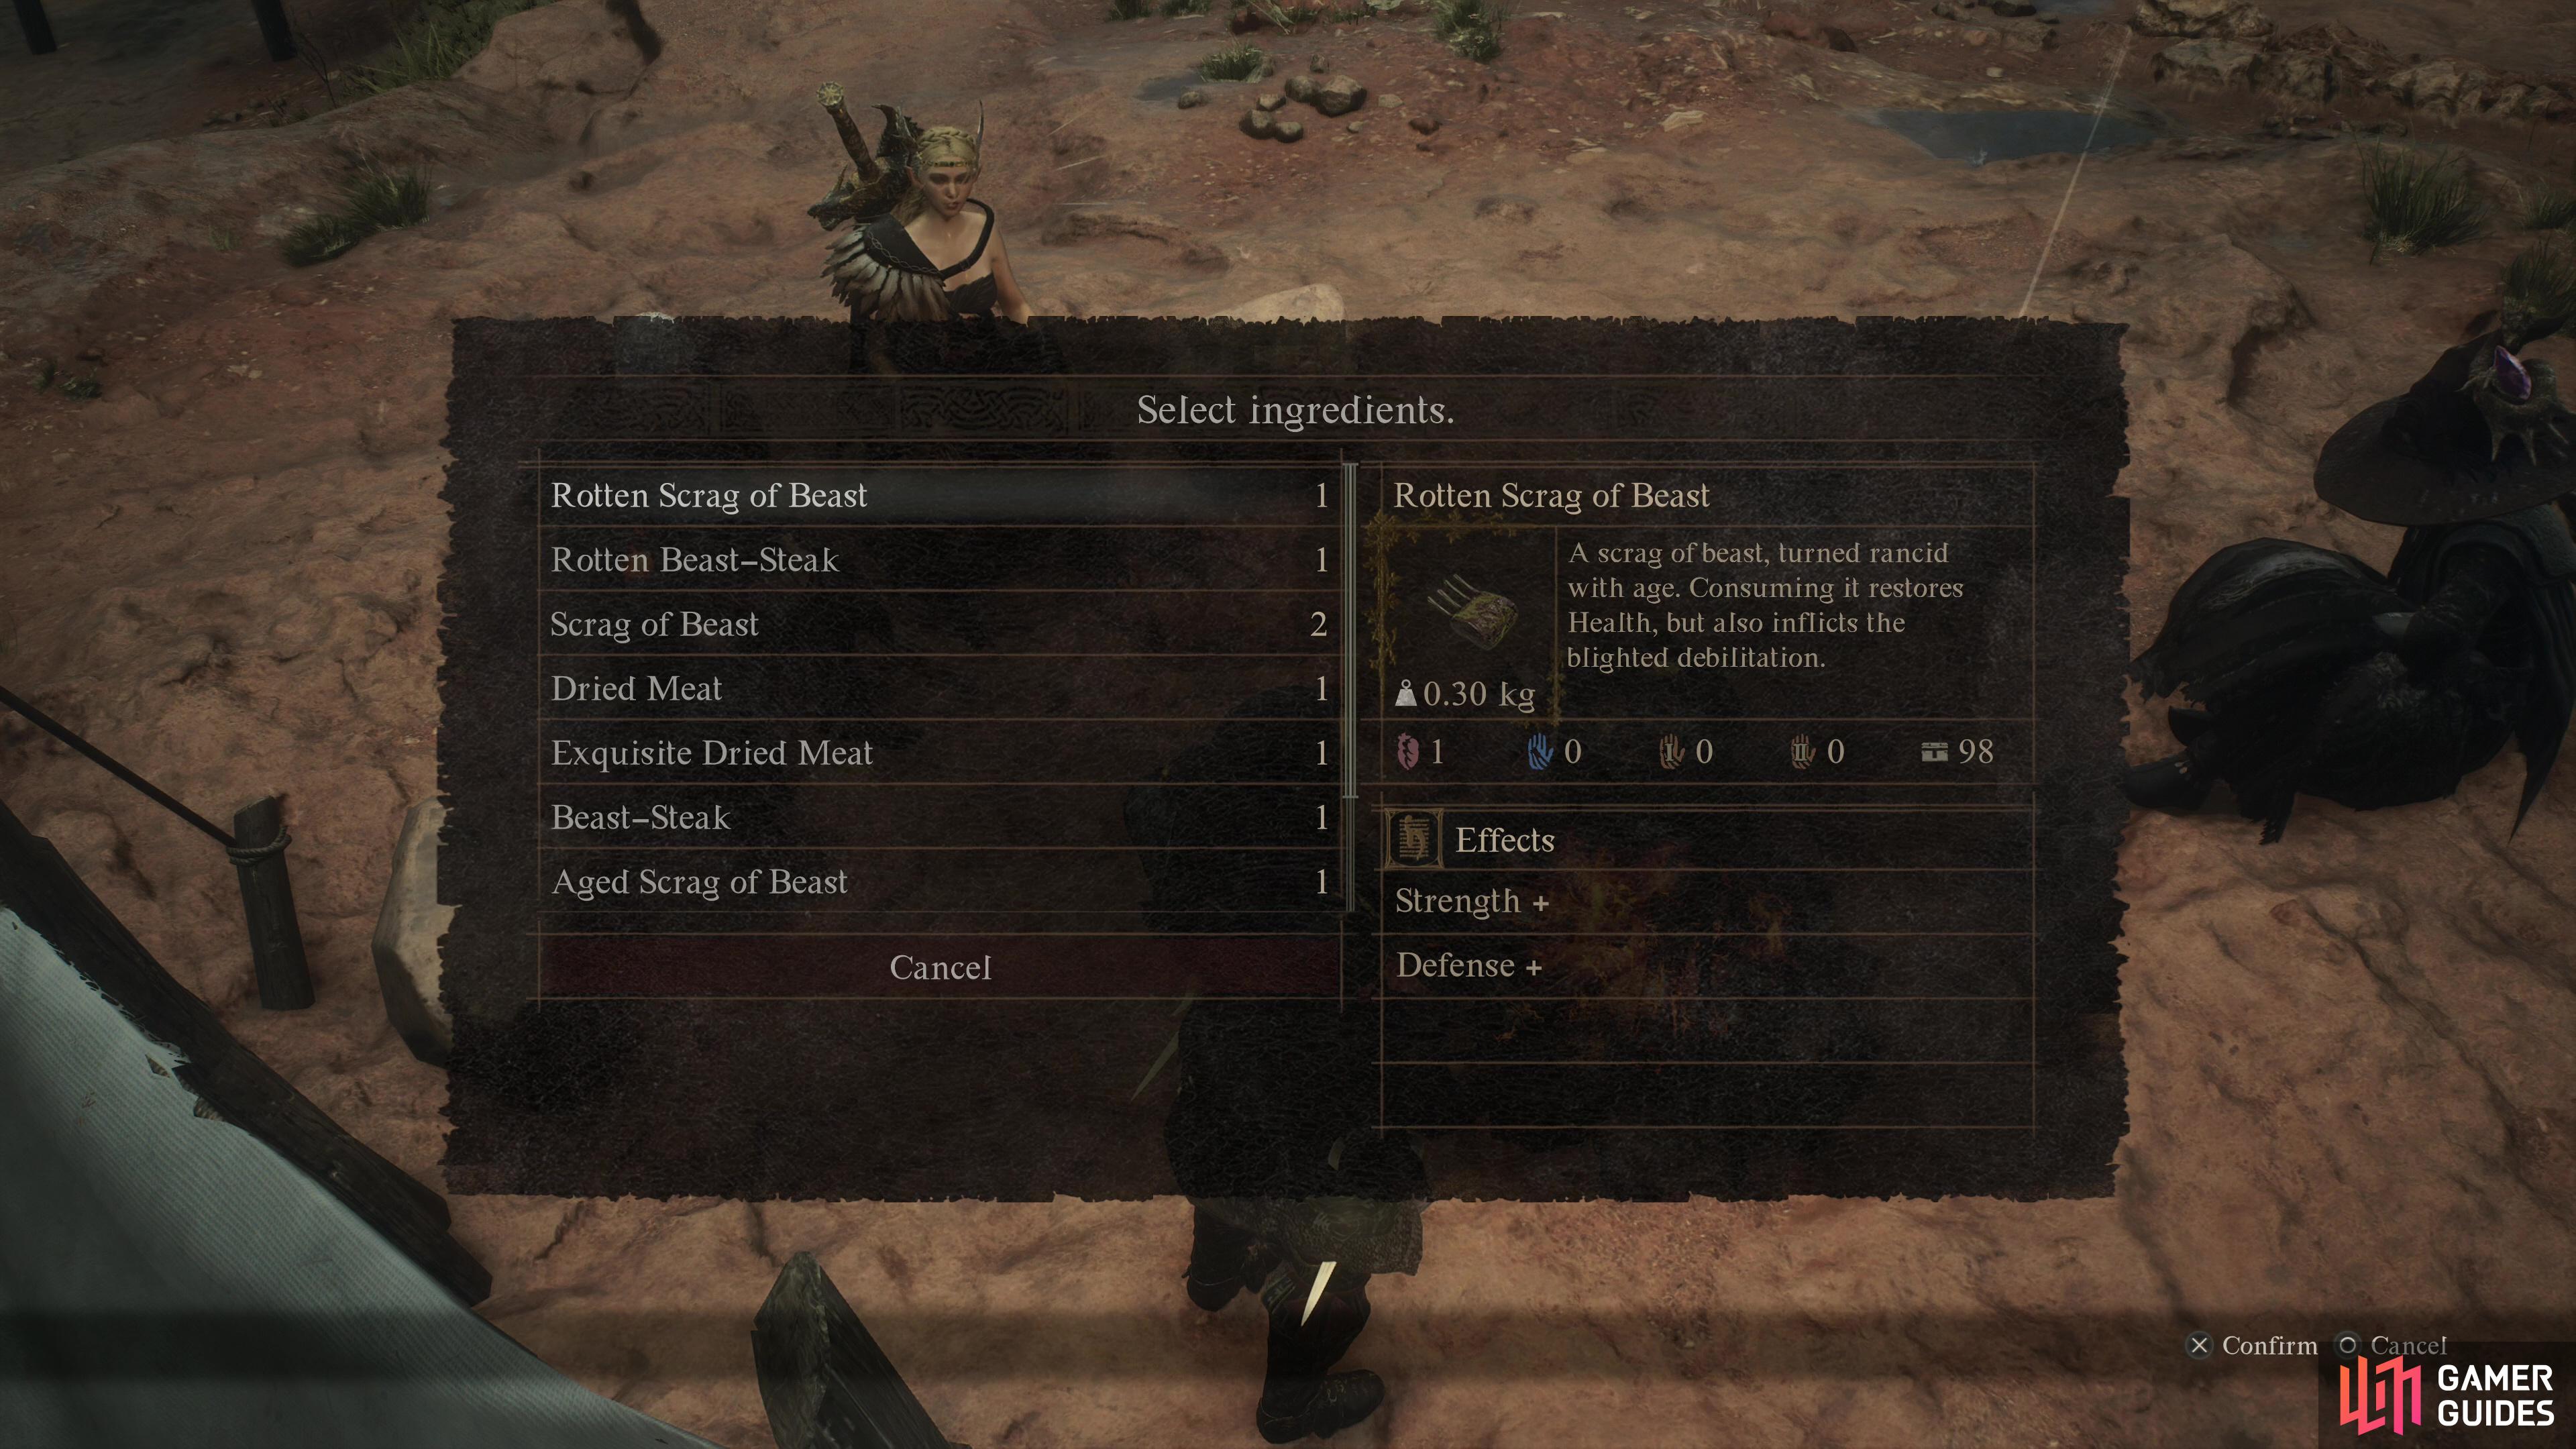 You can cook meat while camping, gaining various boons (as well as the Blighted debuff, if you consume rotten meat!)